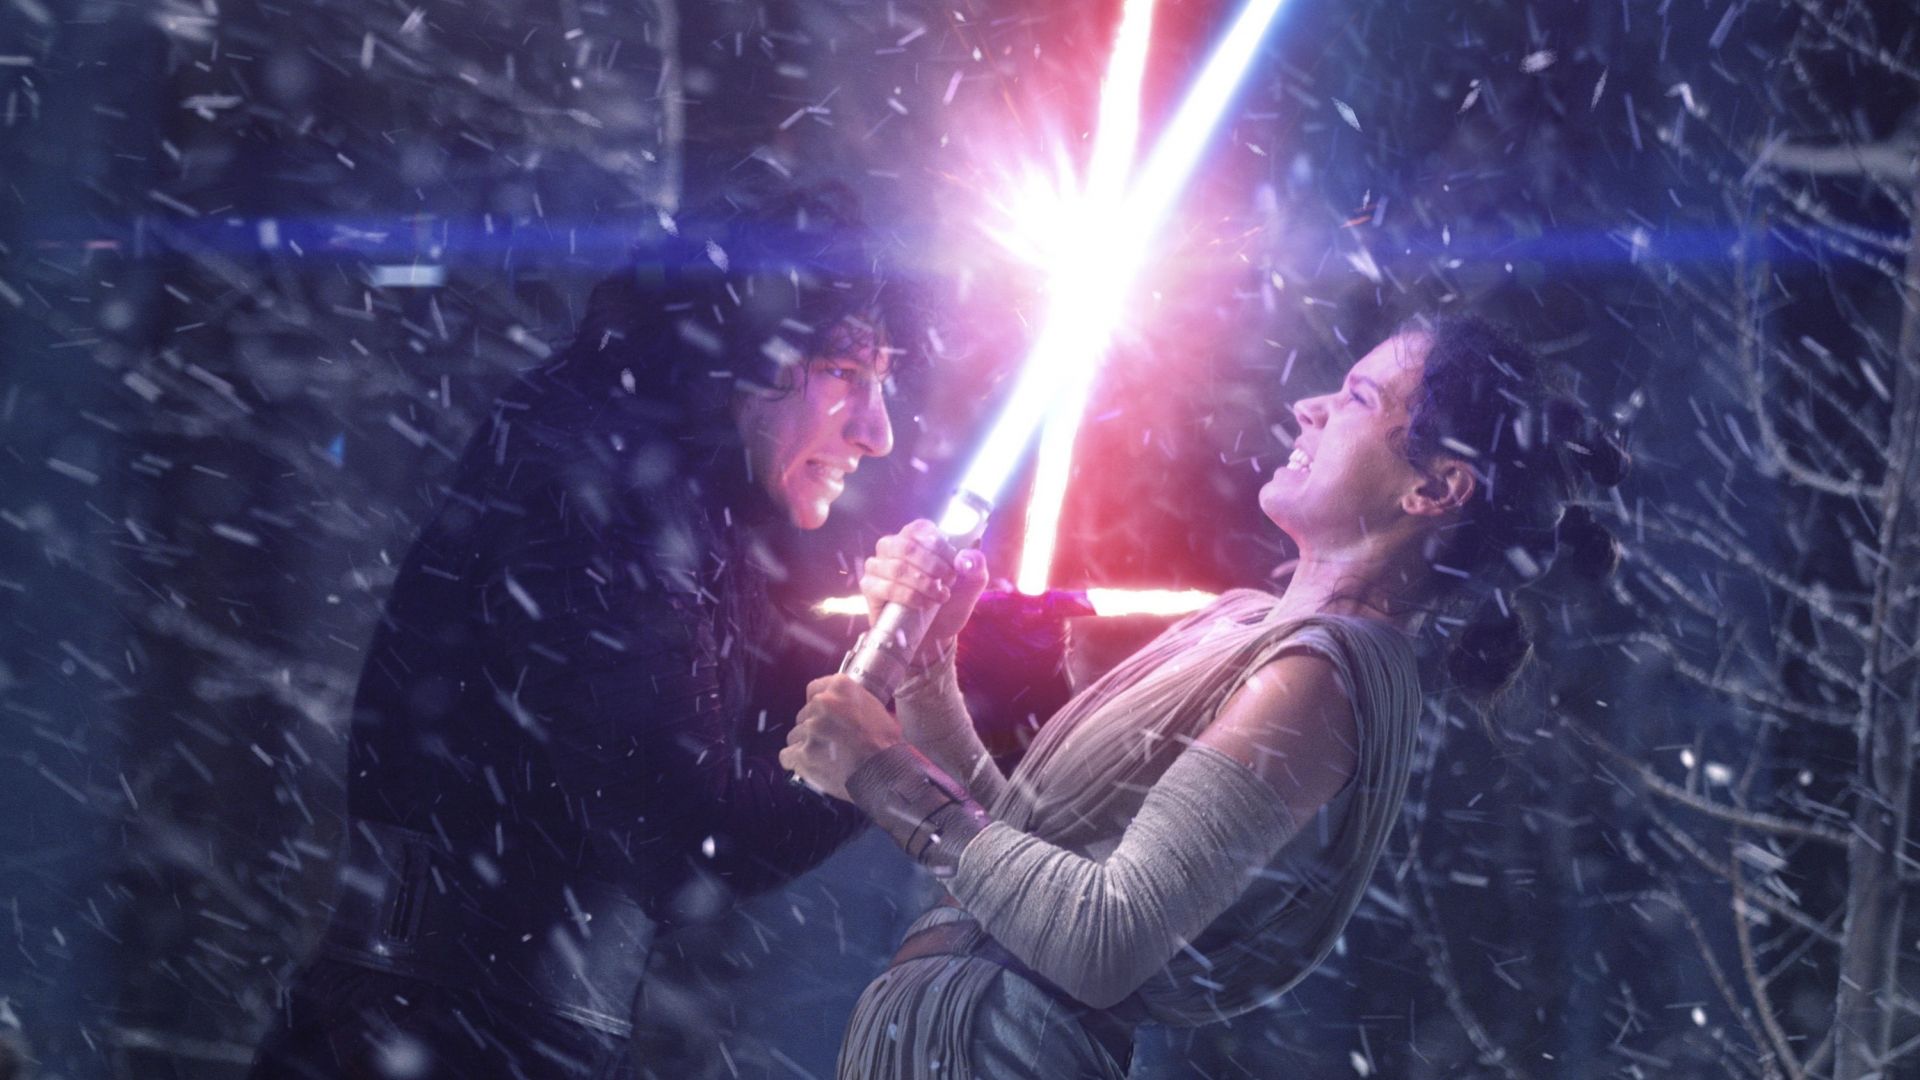 Wallpaper Rey and kylo ren, fighting with lightsaber, star wars, movie